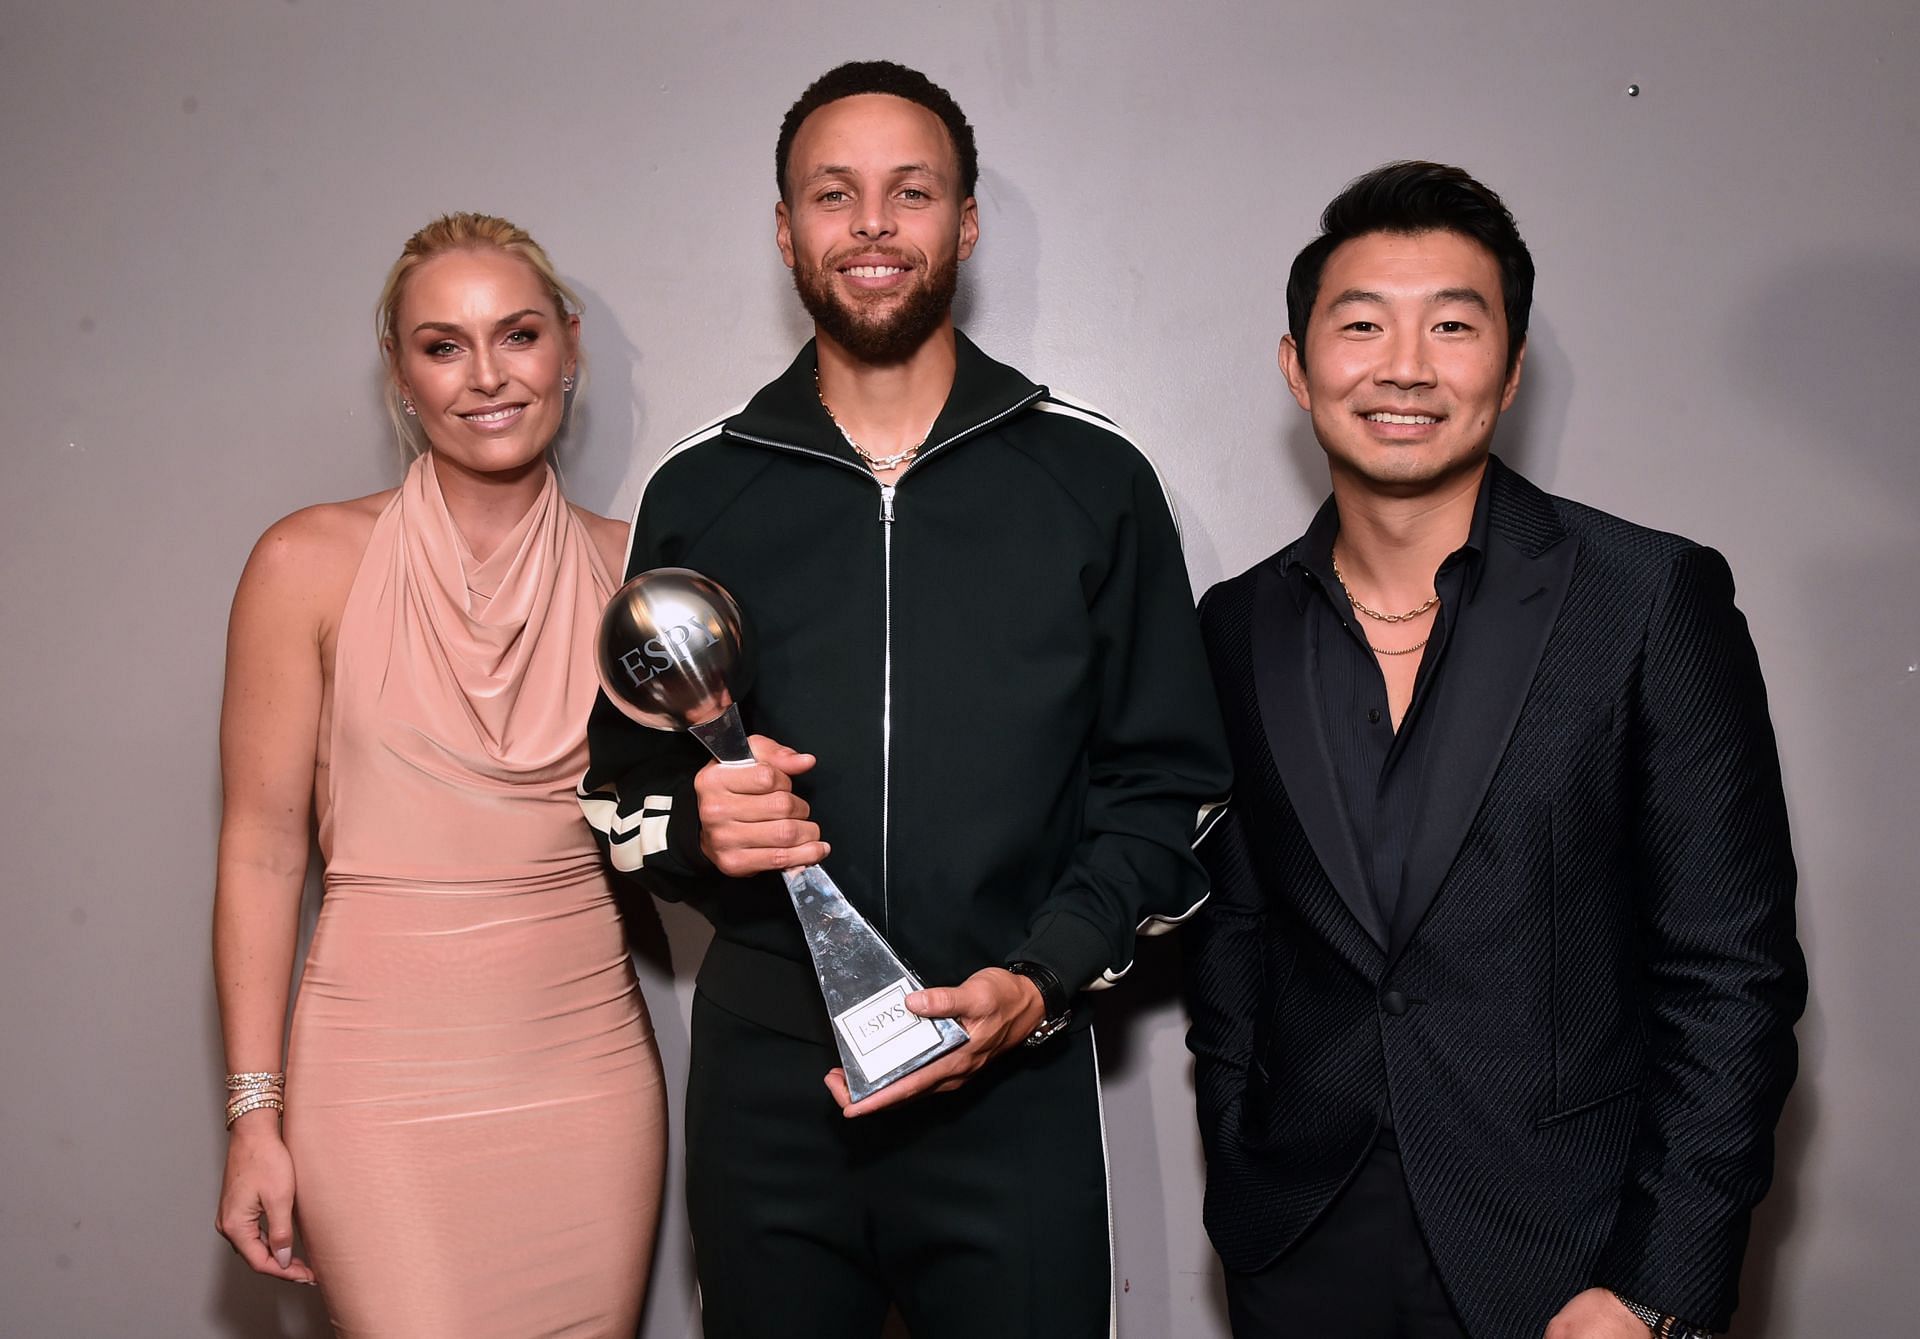 Steph Curry wins Best NBA Player award at the 2022 ESPYs